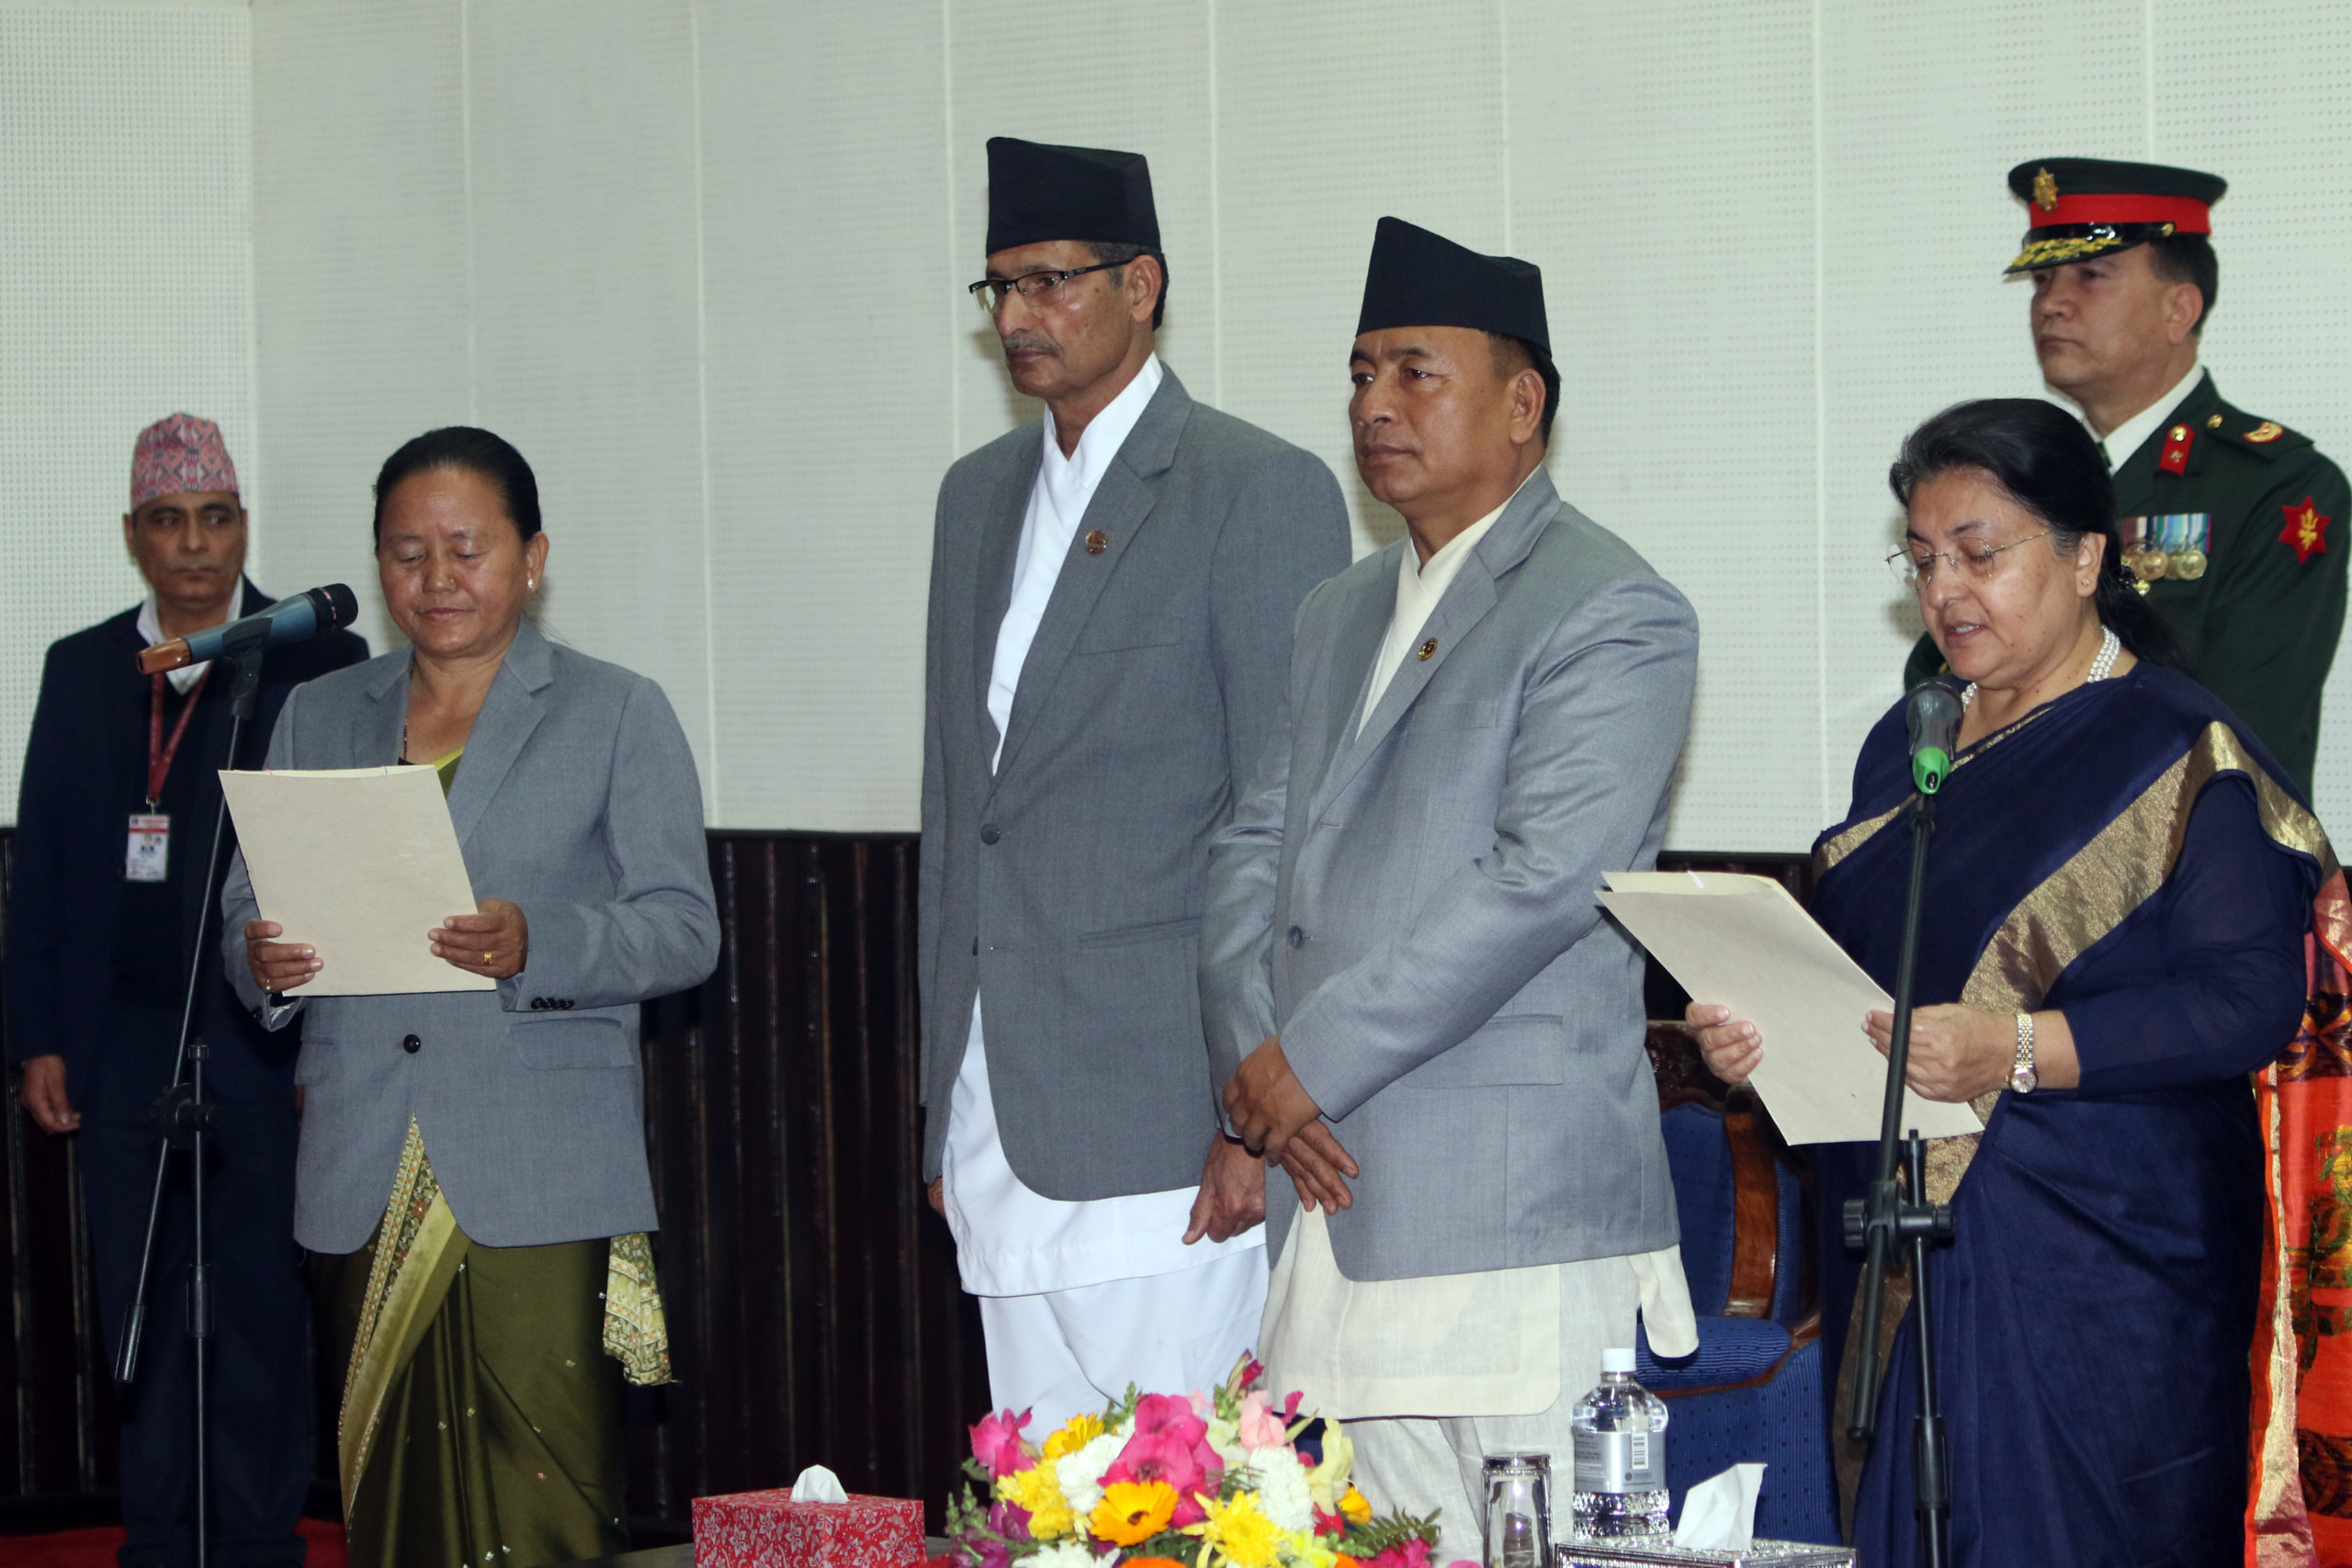 Tumbahamphe sworn in as Law Minister